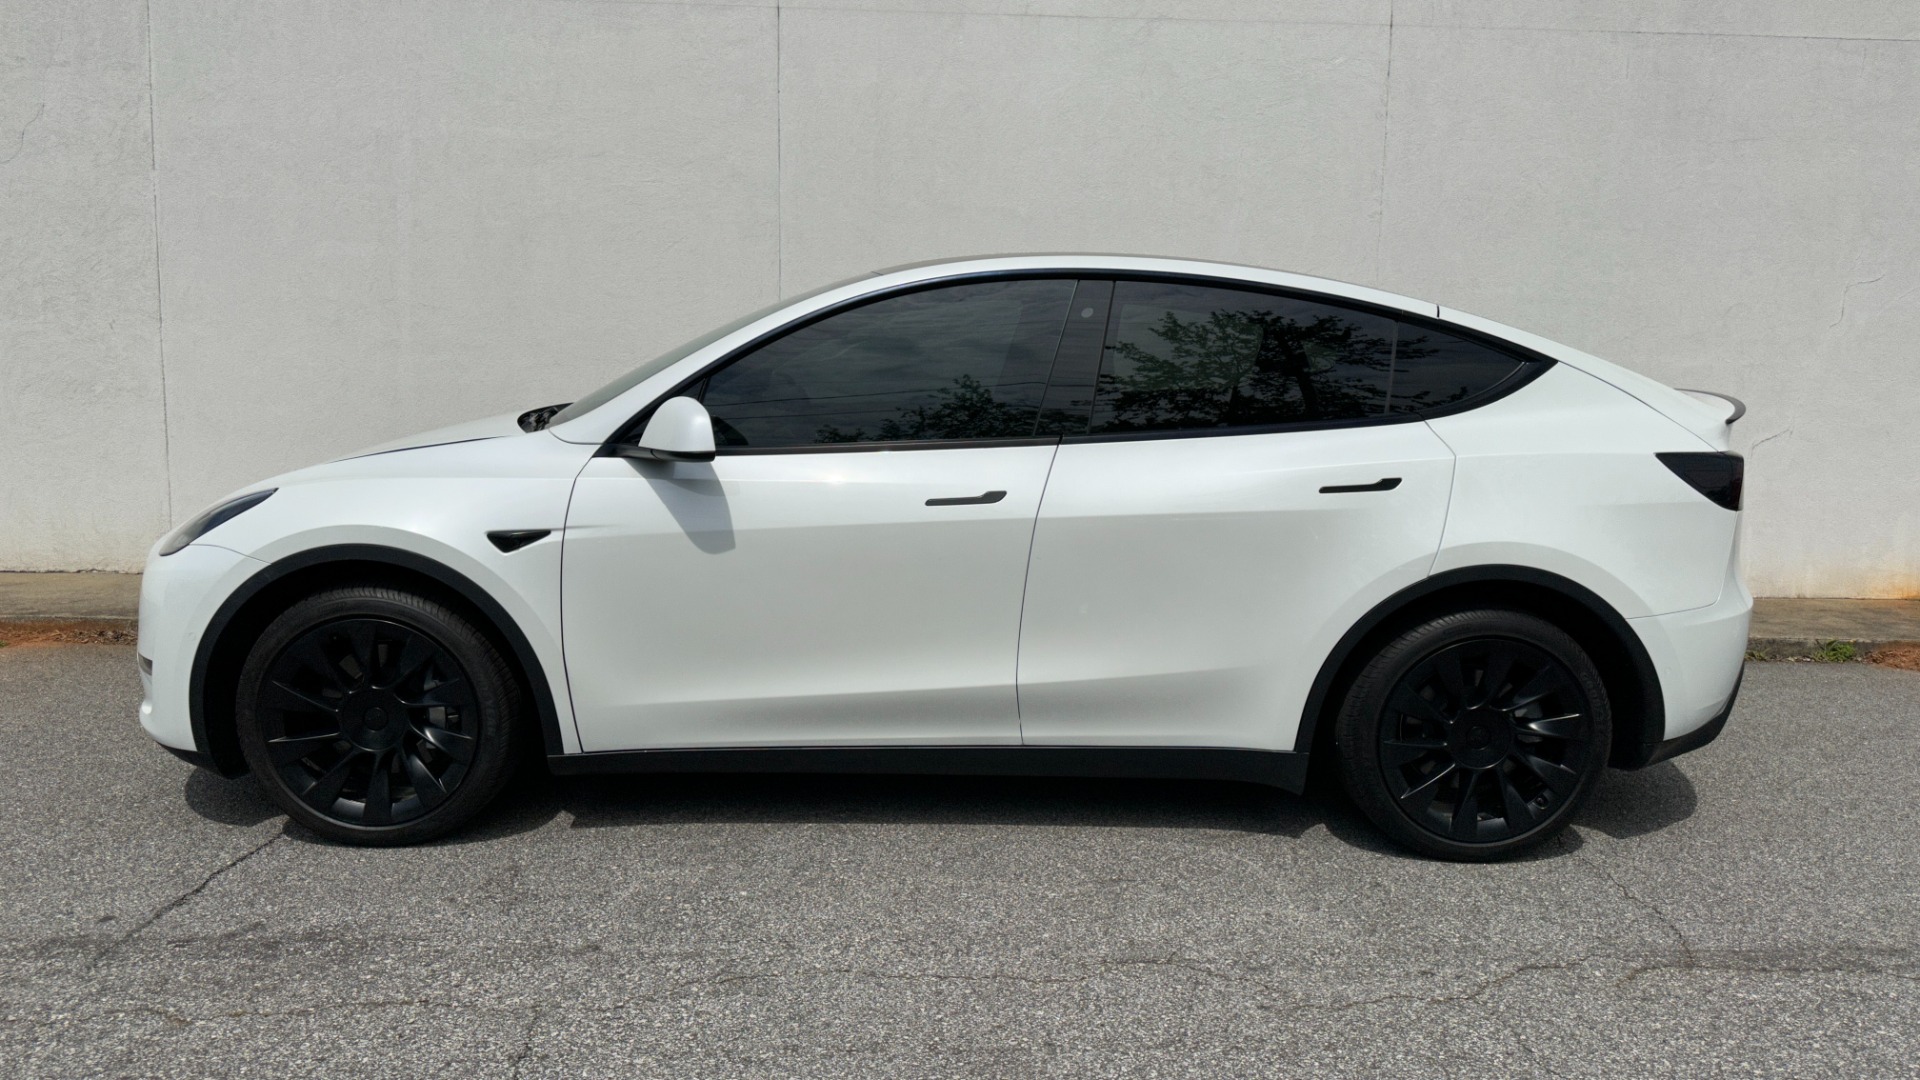 Used 2020 Tesla MODEL Y LONG RANGE ACCELERATION BOOST / AUTOPILOT / STANDARD CONNECTIVITY / WOOD TRIM for sale $44,495 at Formula Imports in Charlotte NC 28227 3